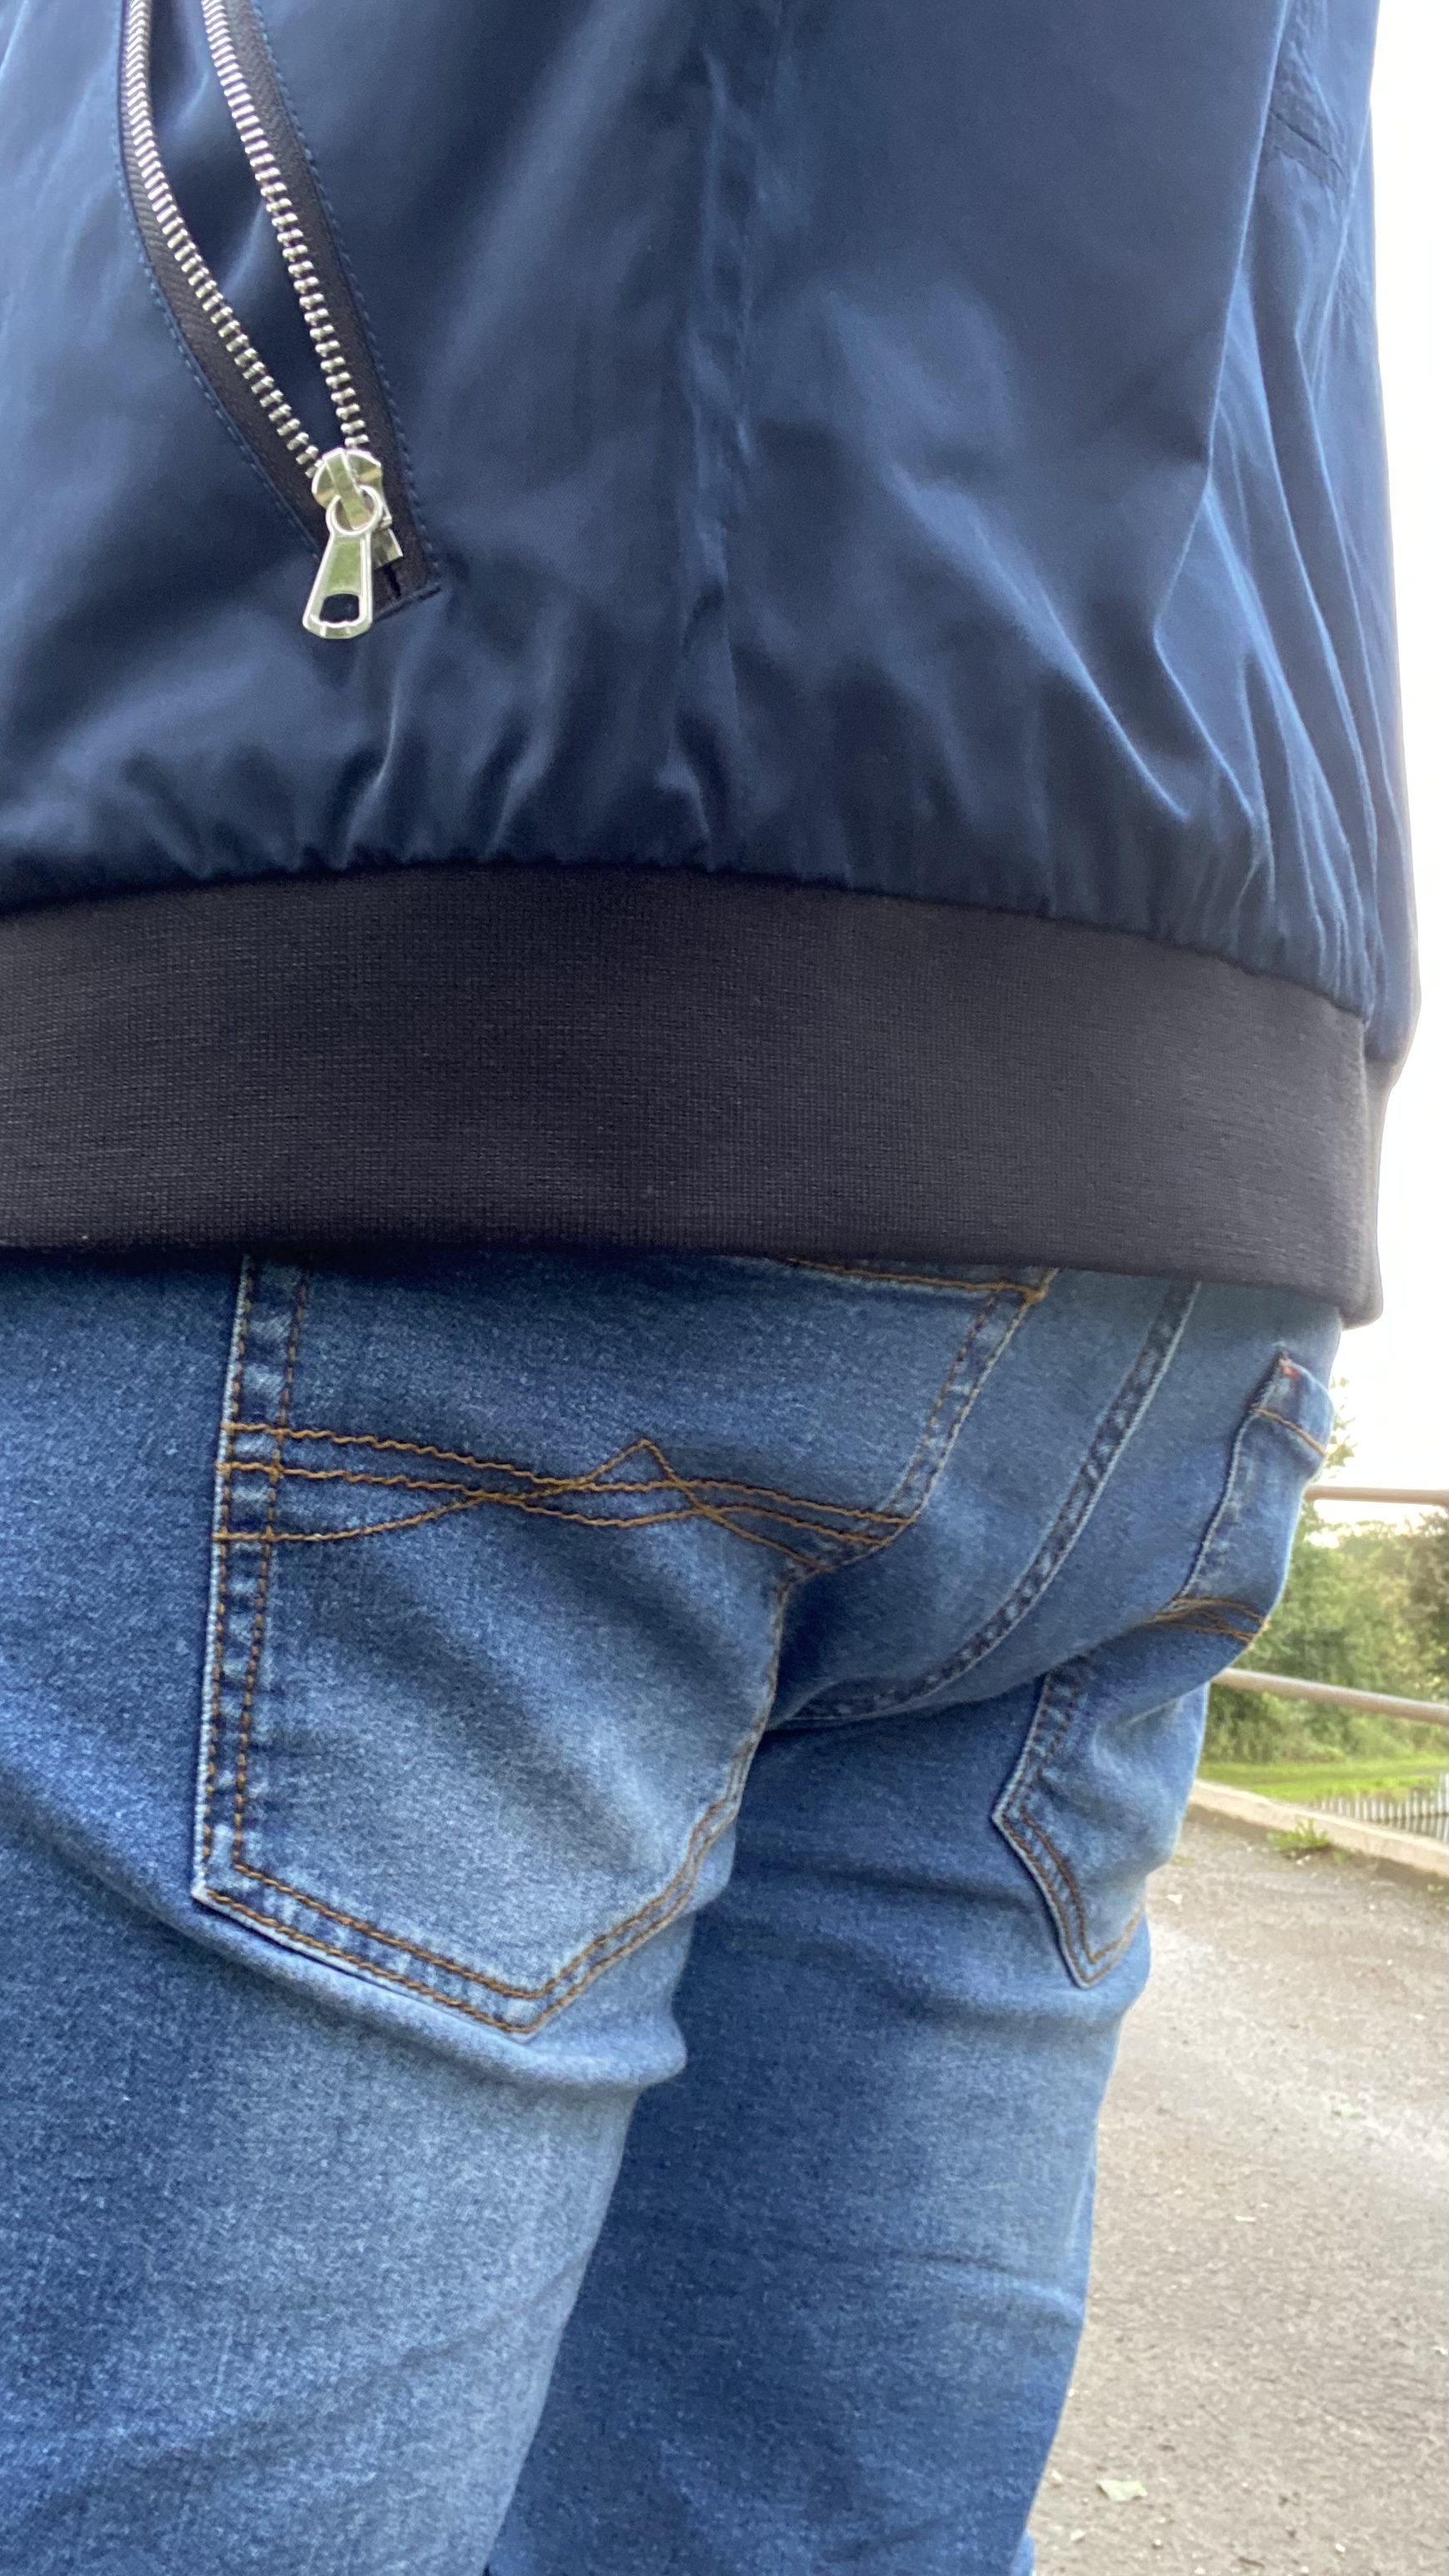 Lad shits himself outdoors on a walk